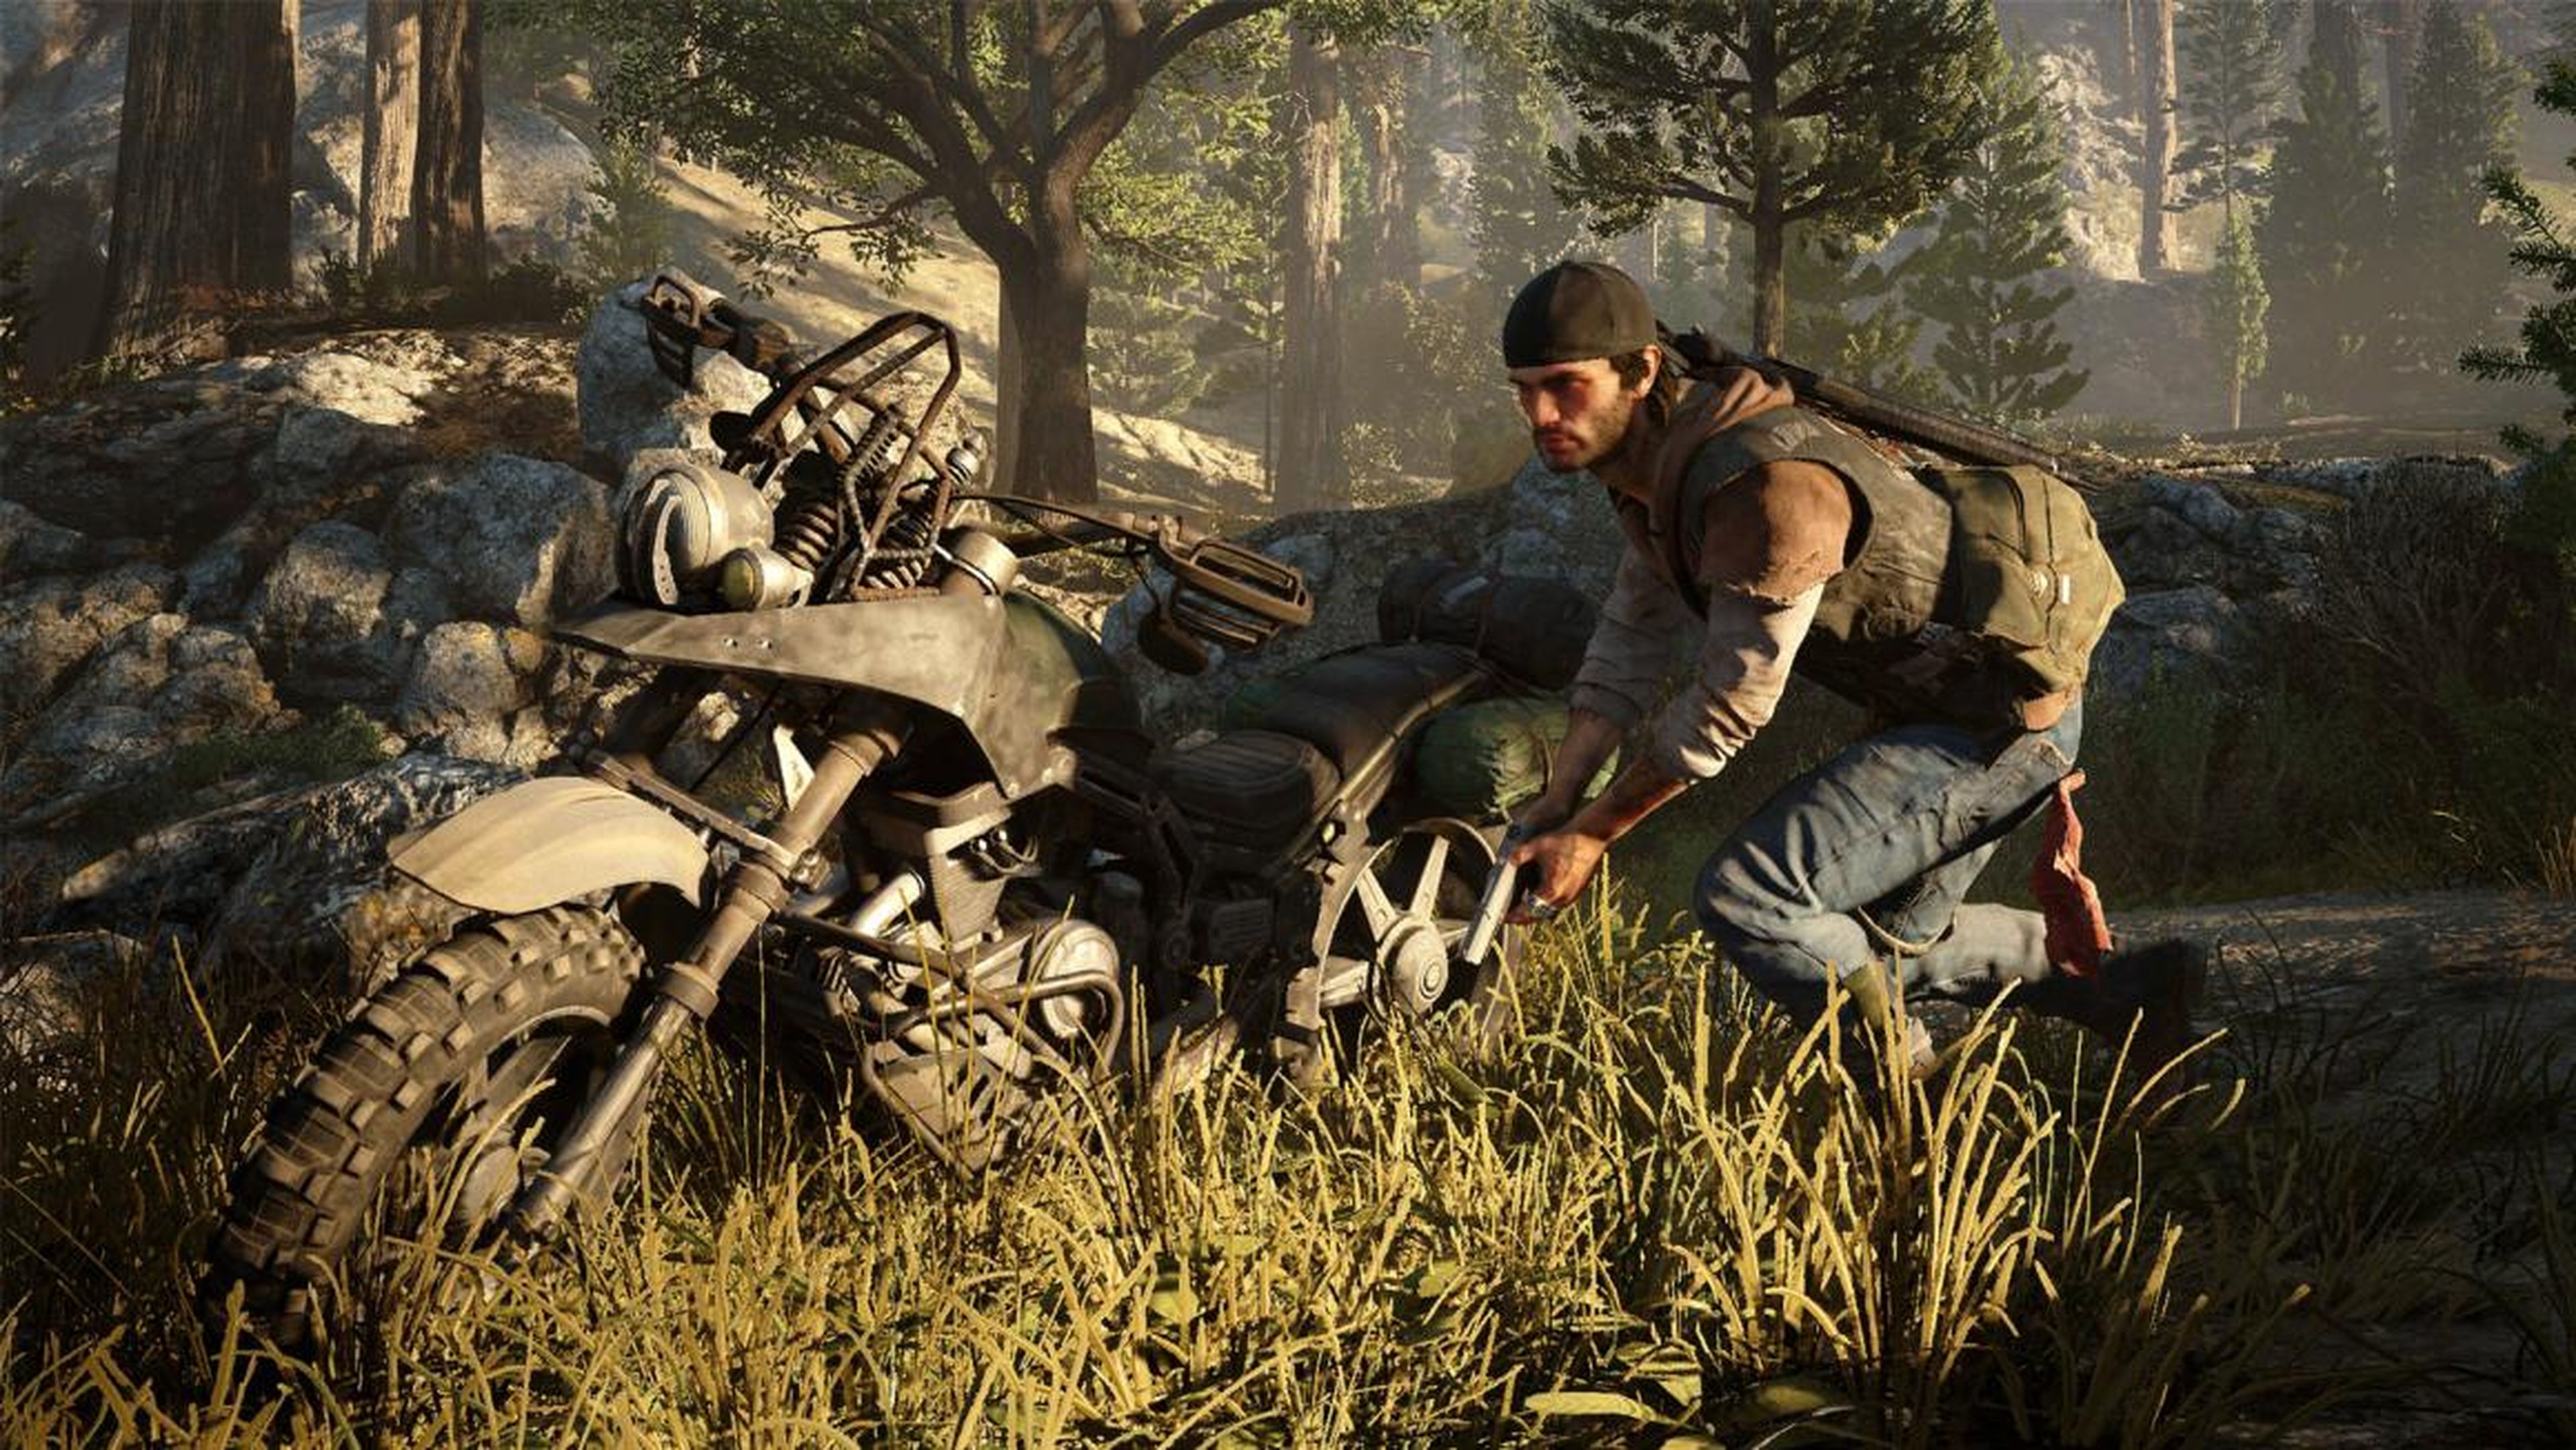 2. The last few major exclusive games for the PlayStation 4, starting with "Days Gone."